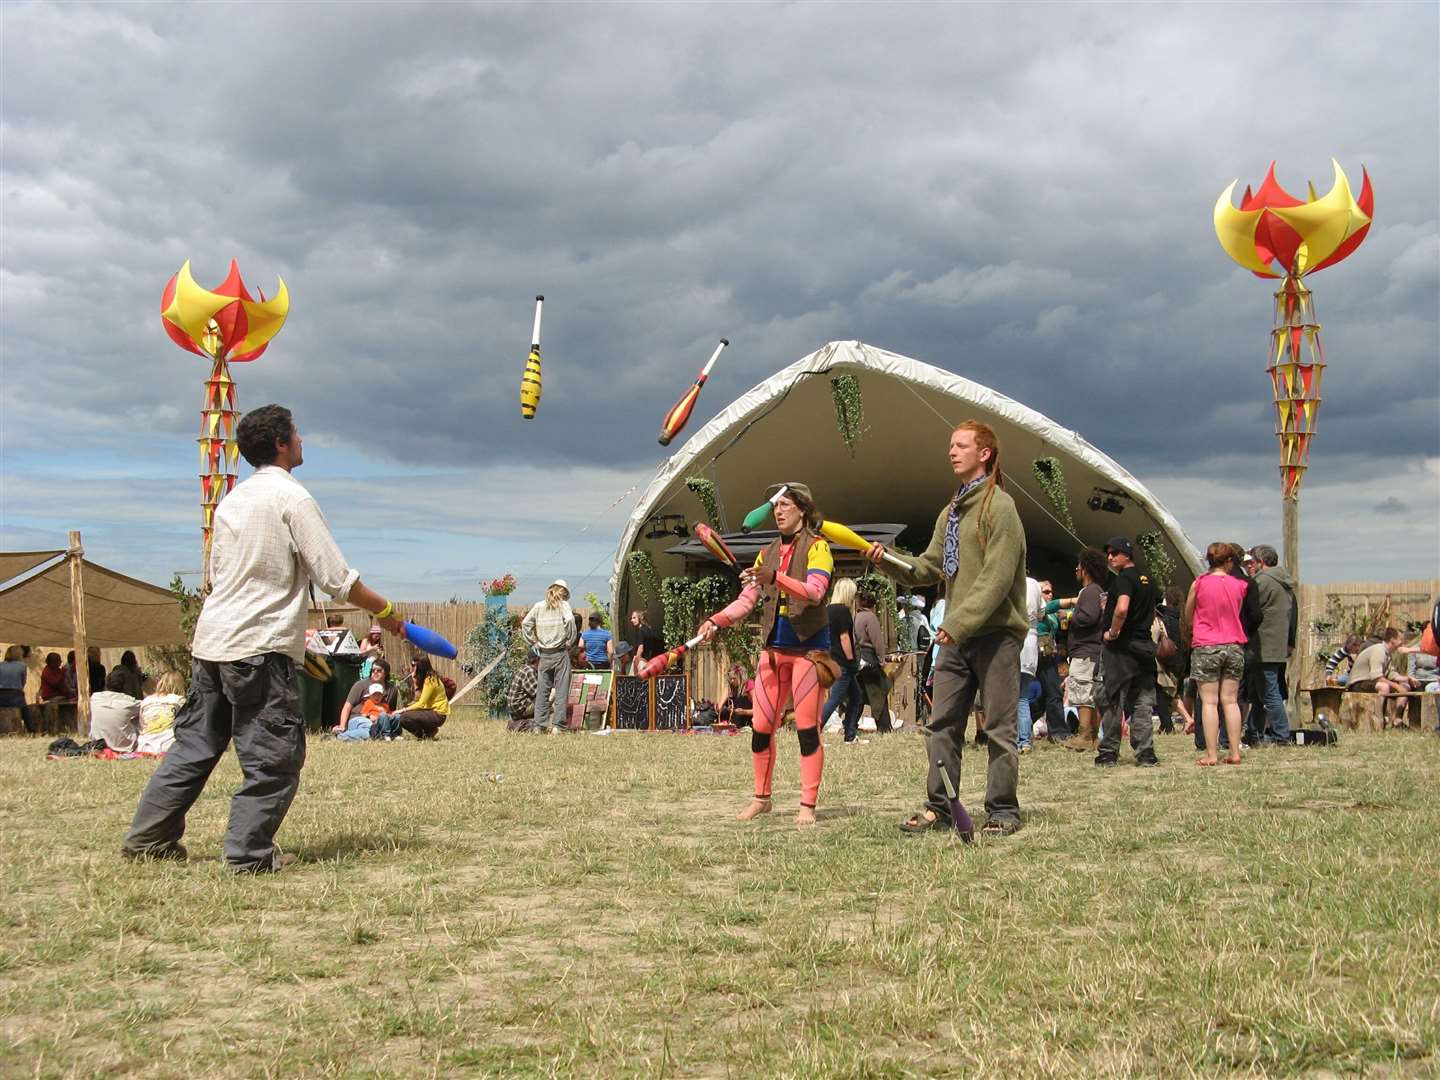 Perhaps the jugglers were the downfall of Lounge on the Farm? (But probably not)